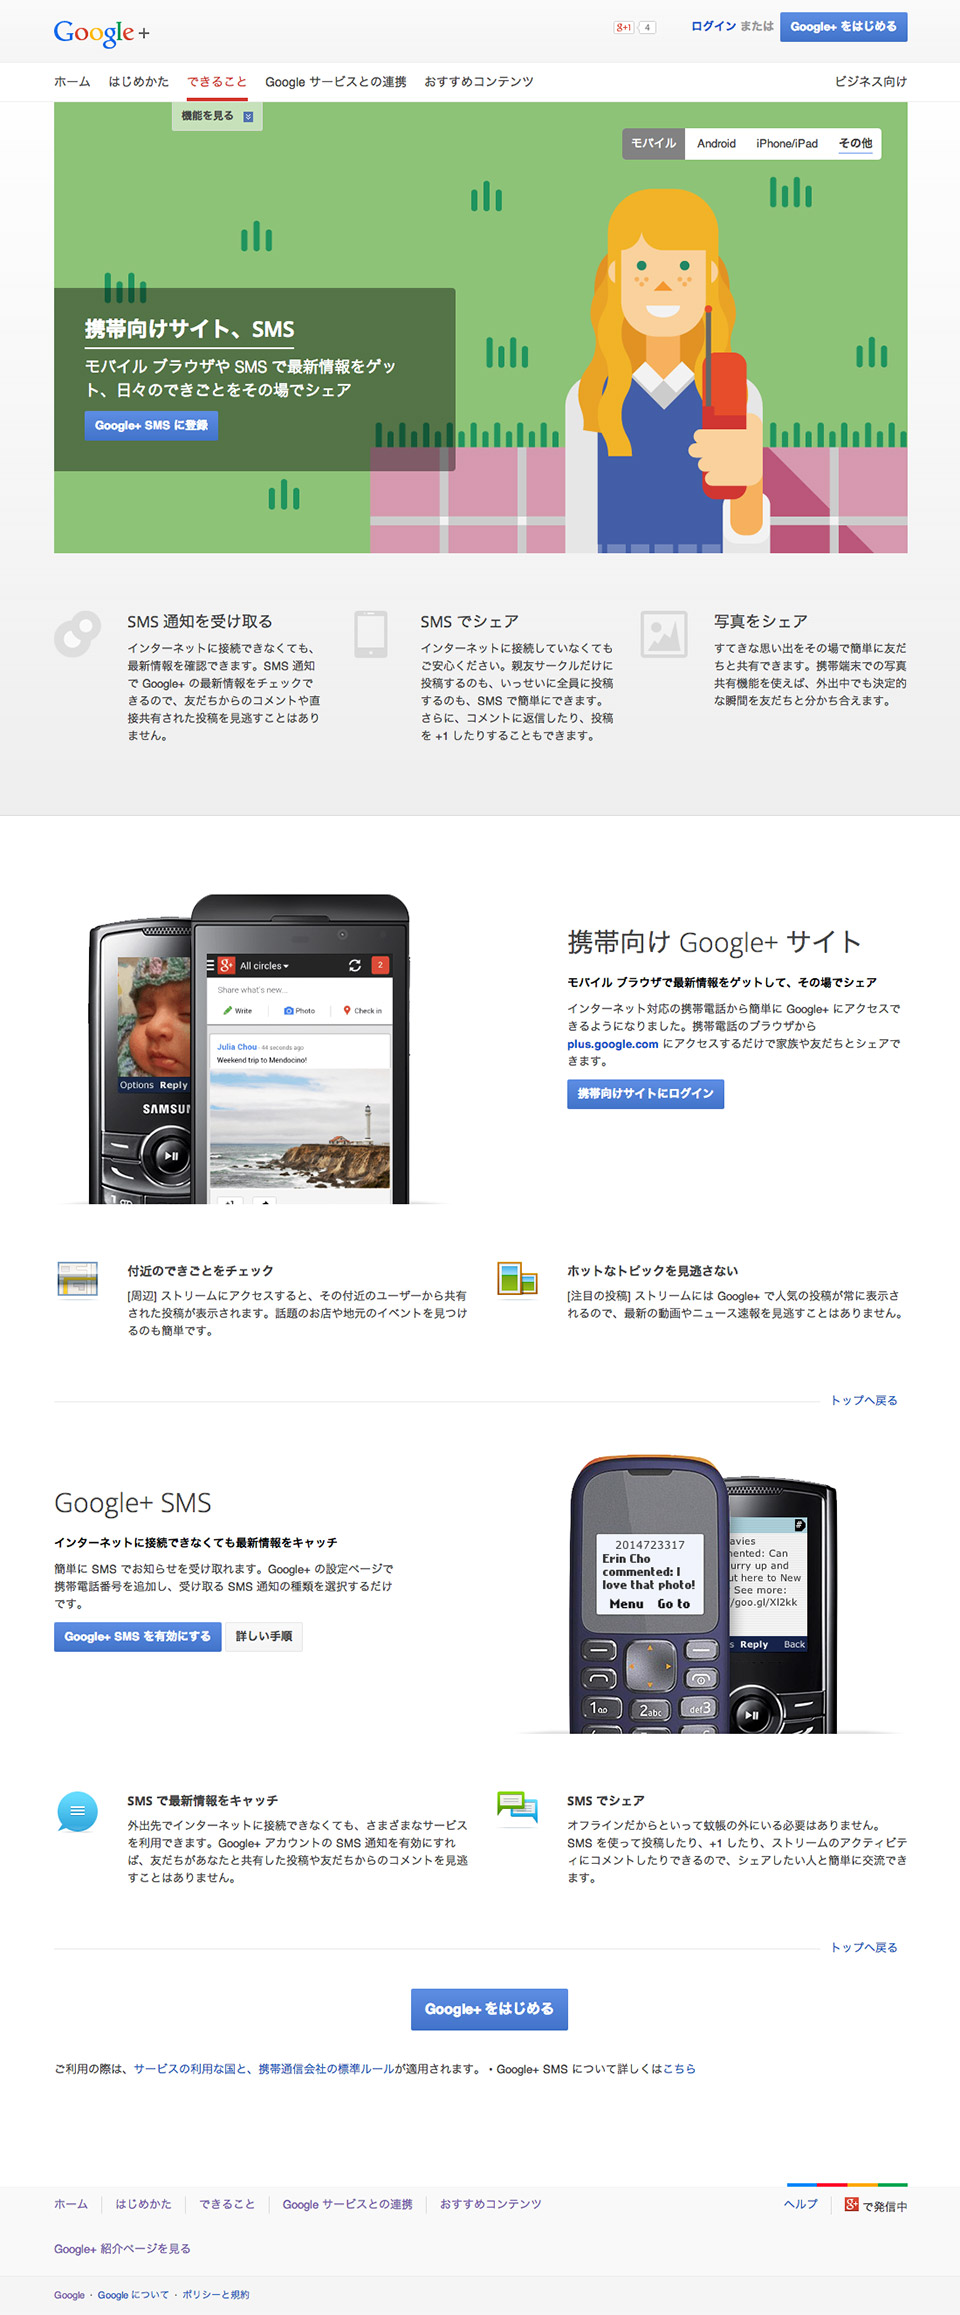 Google Japan - Learn More - SMS